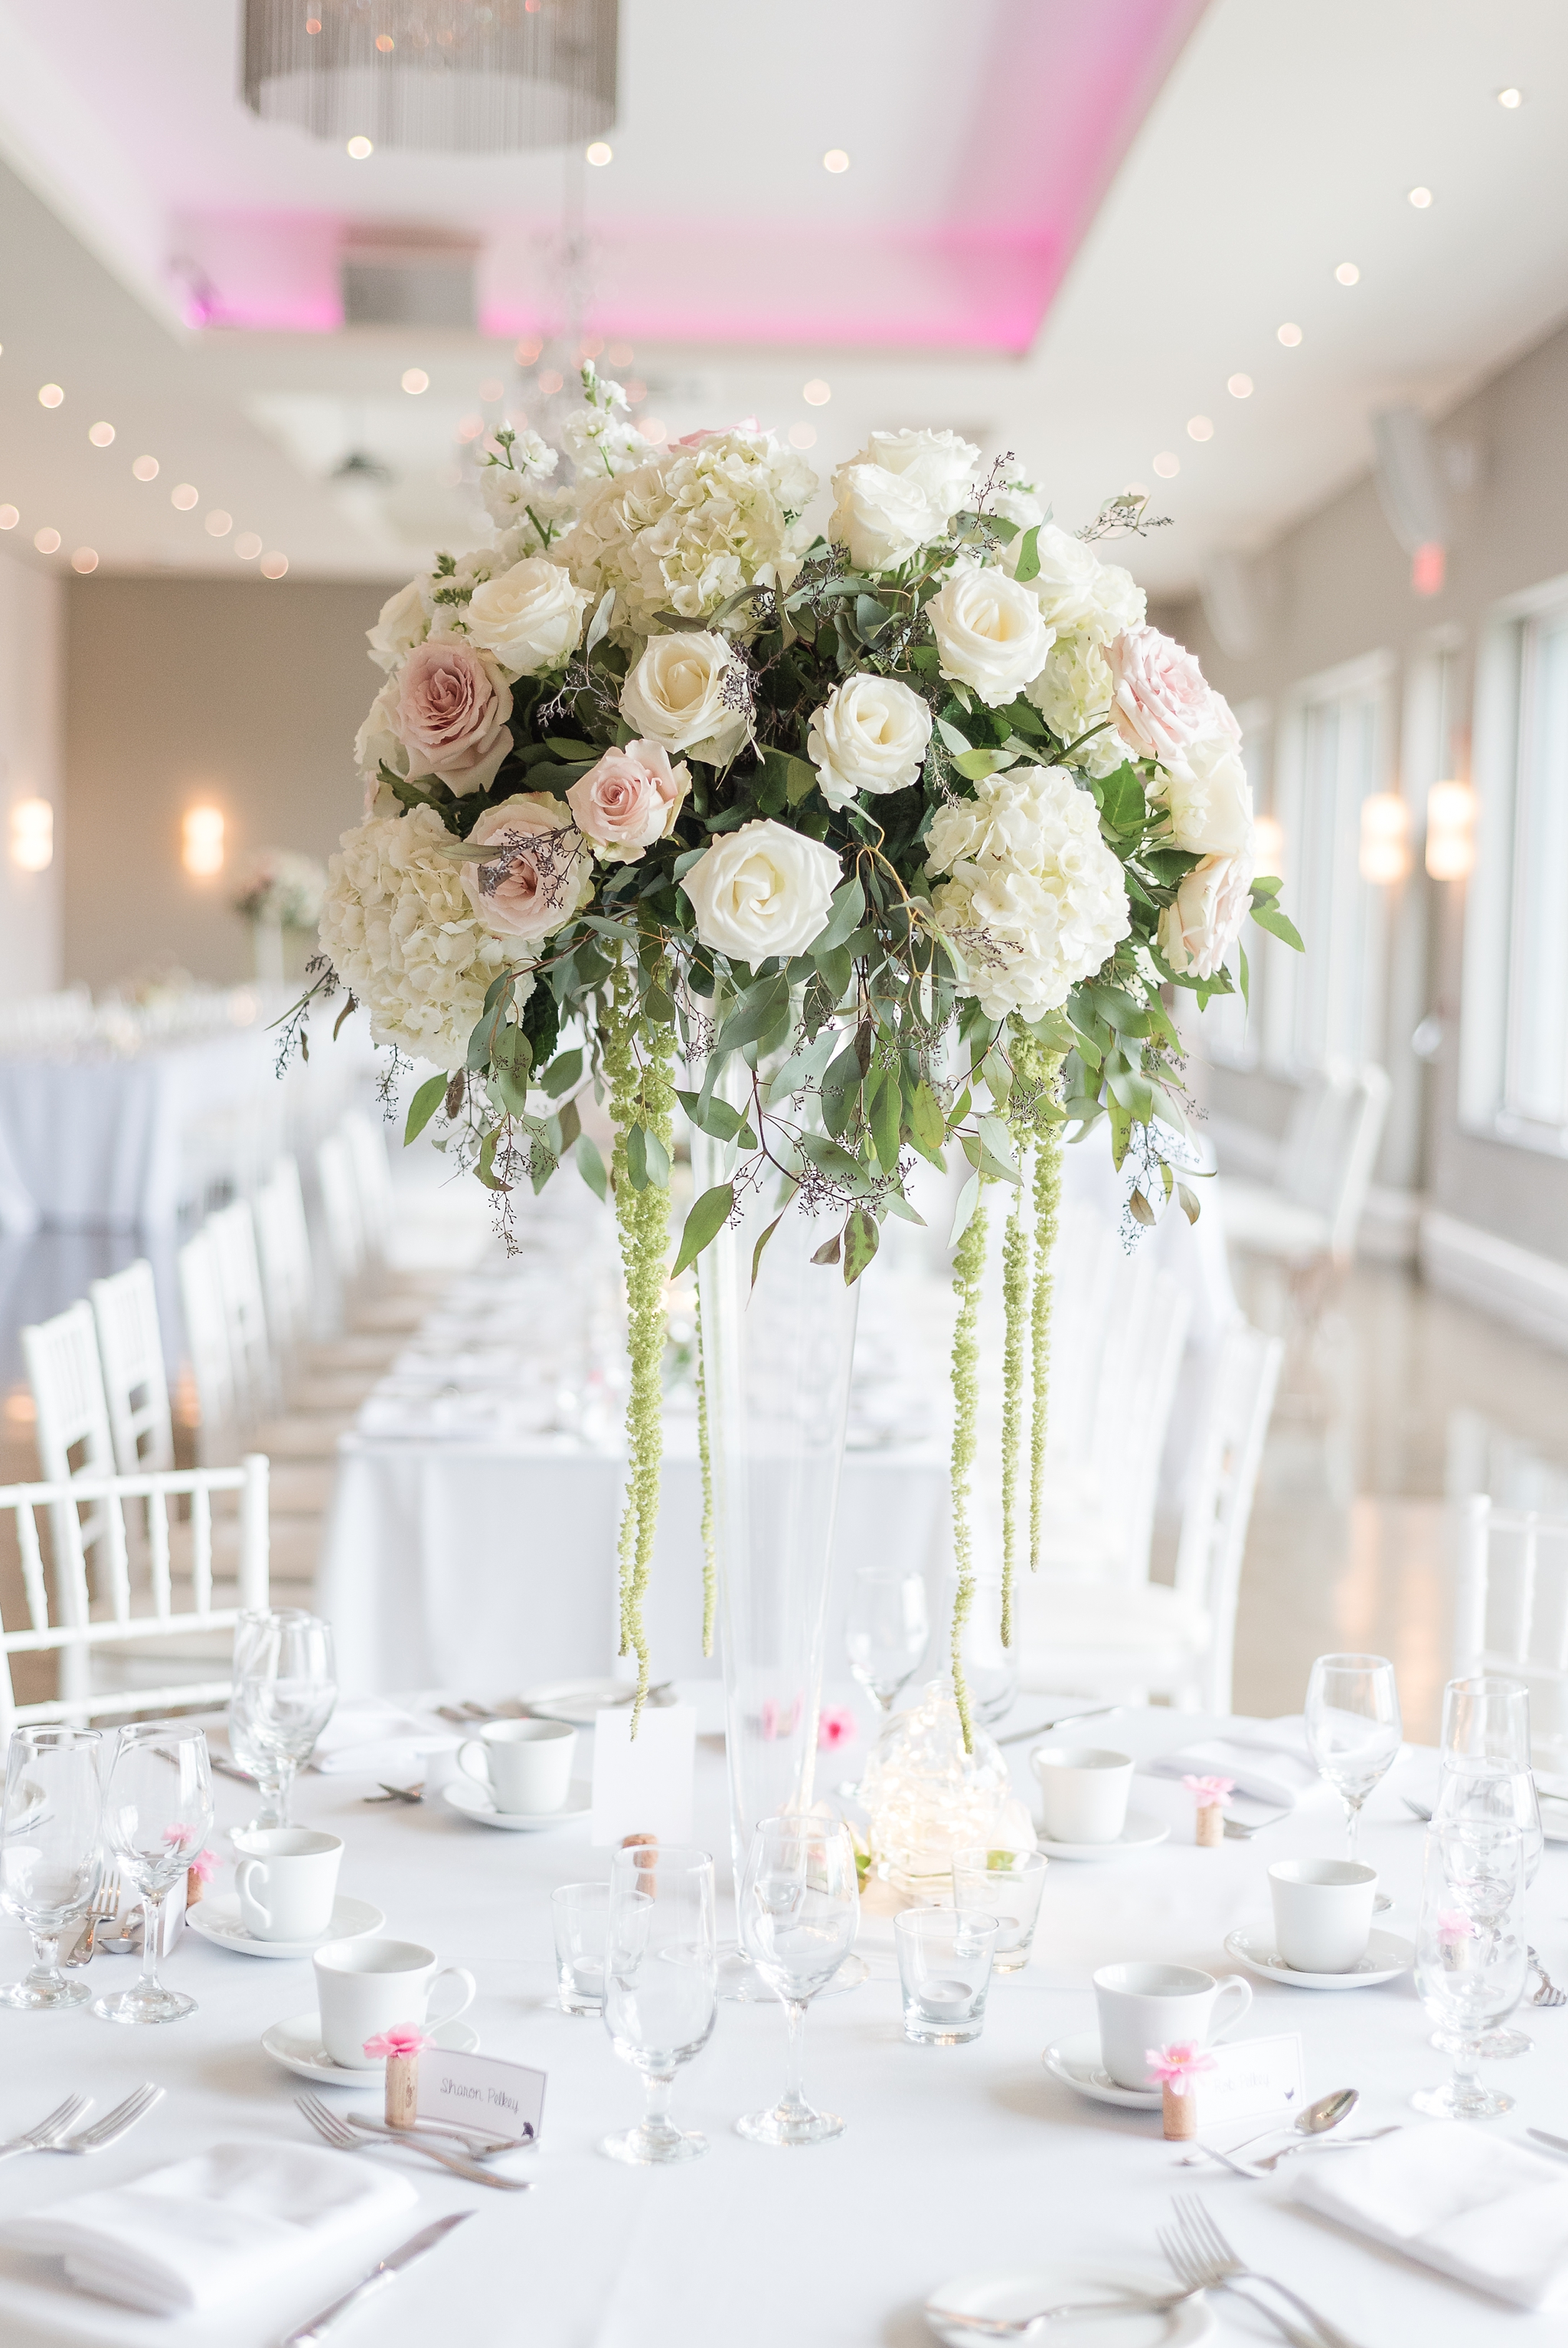 Colourful le belvedere wedding in wakefield, quebec